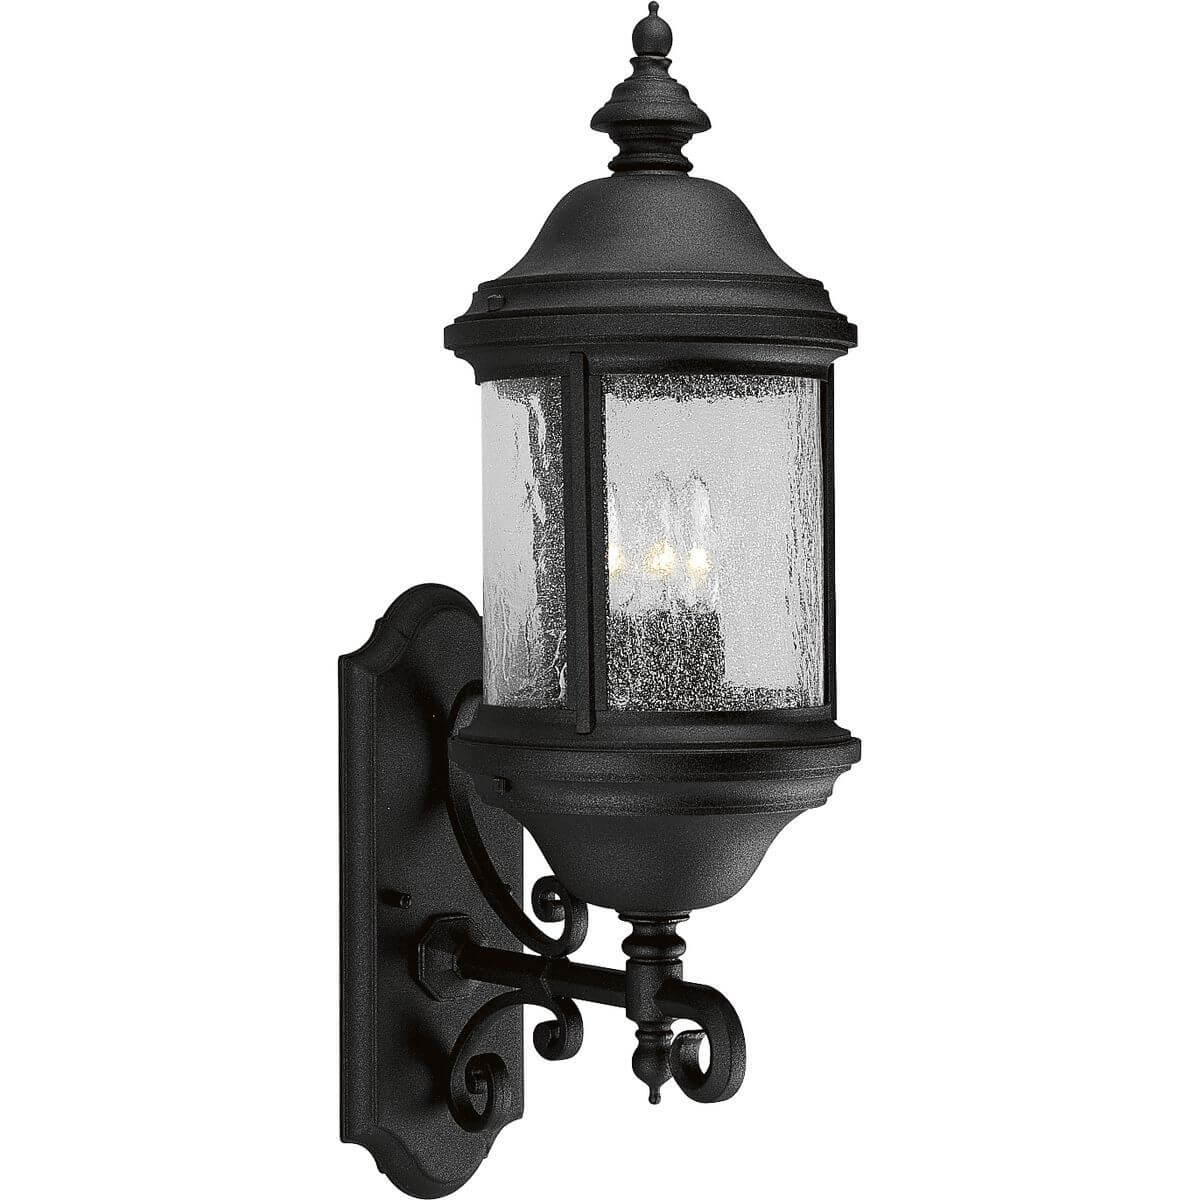 Progress Lighting Ashmore 3 Light 26 inch Tall Outdoor Wall Lantern in Textured Black with Water Seeded Curved Glass Panels P5652-31